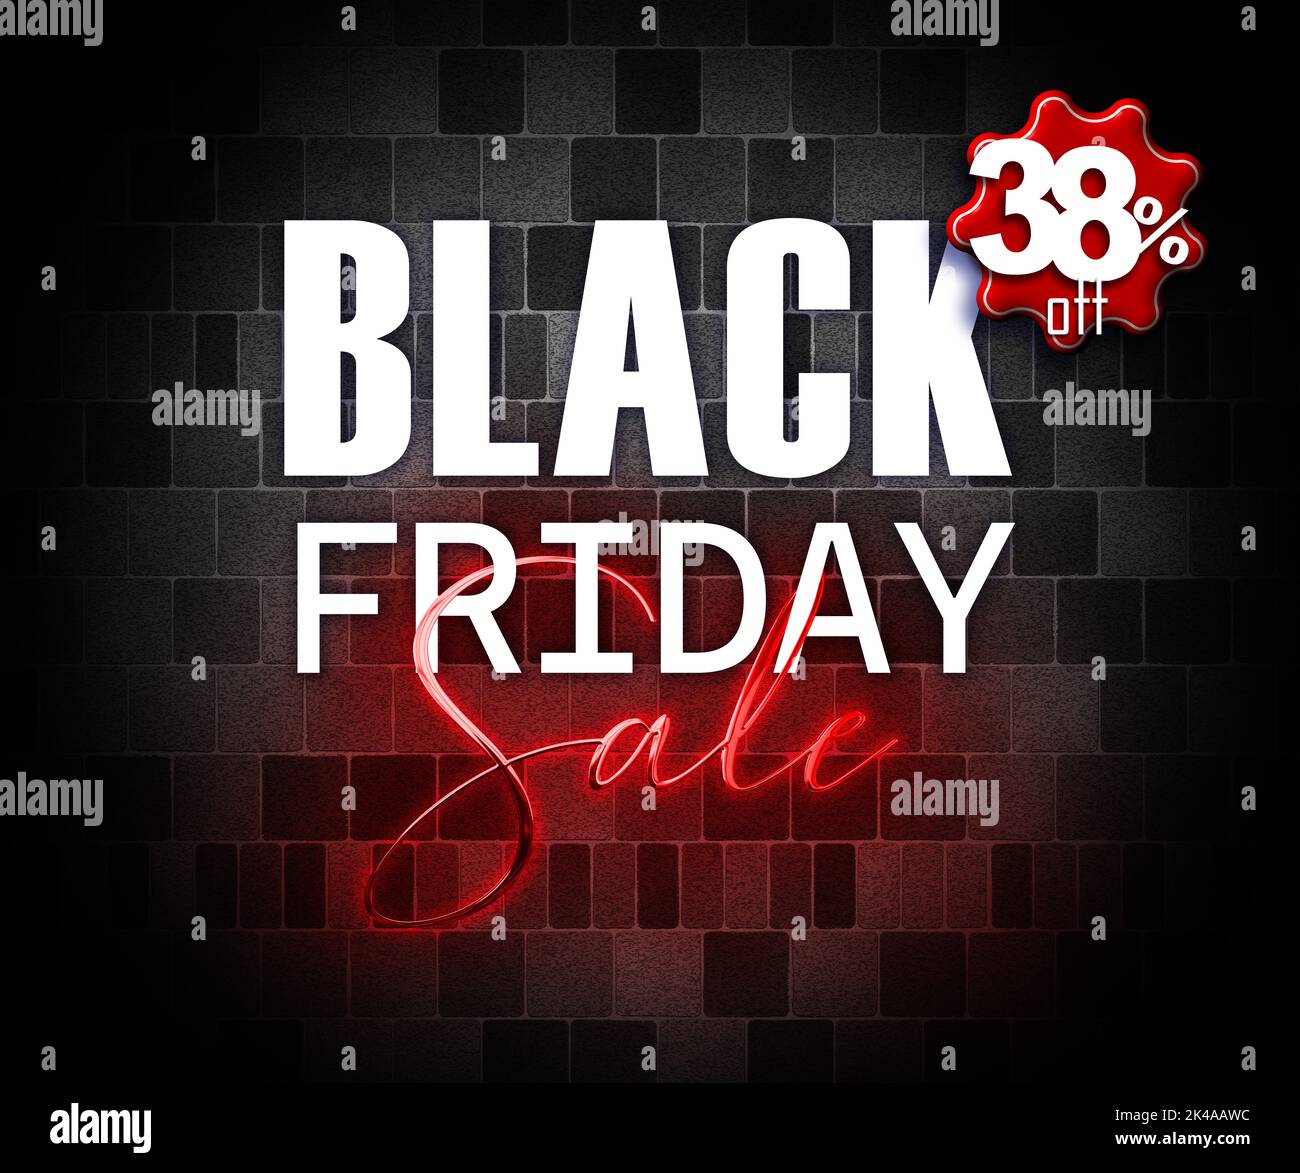 illustration with 3d elements black friday promotion banner 38 percent off sales increase Stock Photo